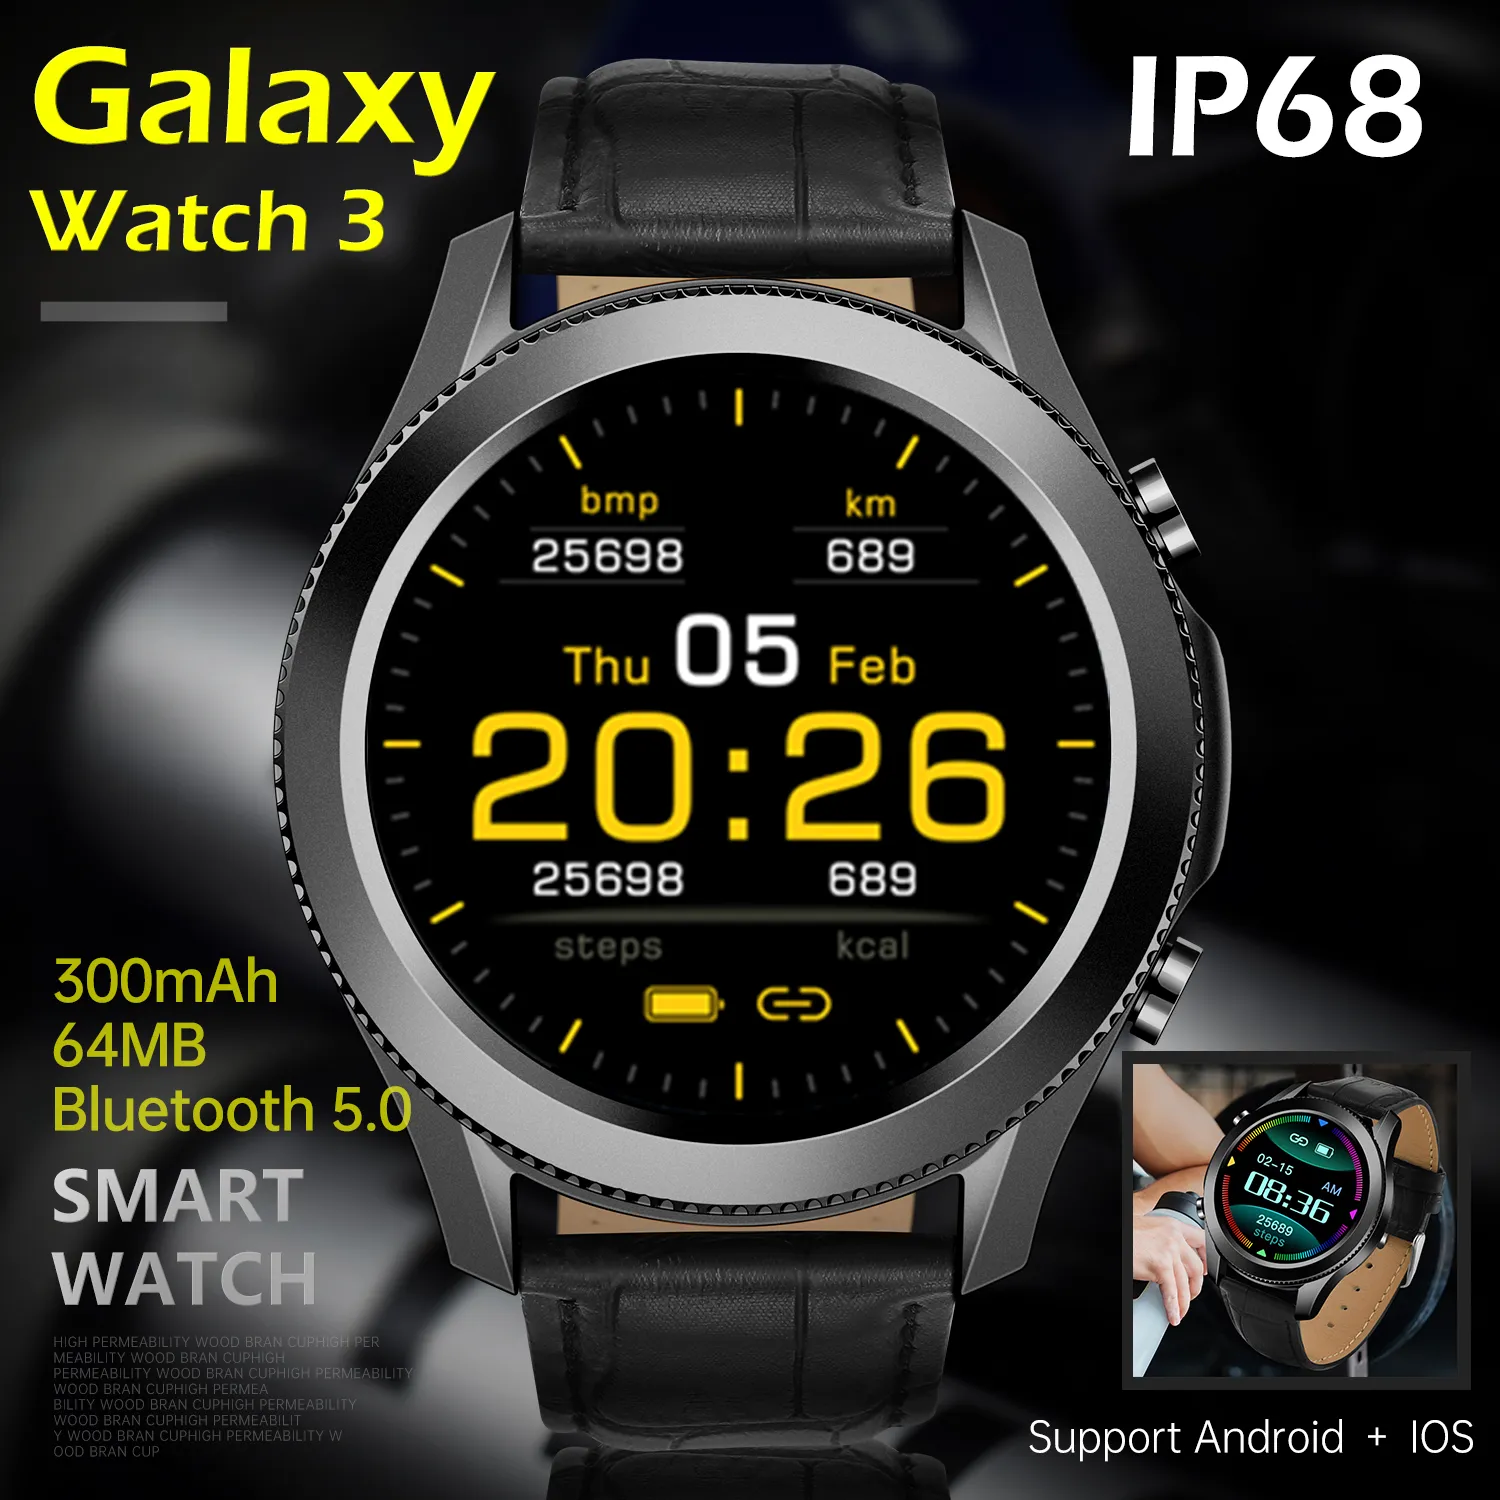 2021 New Full Touch Bluetooth Call Smart Watch Galaxy Watch3 Running Sport Watch, with Music Playback Support Android and IOS Mobile Phones